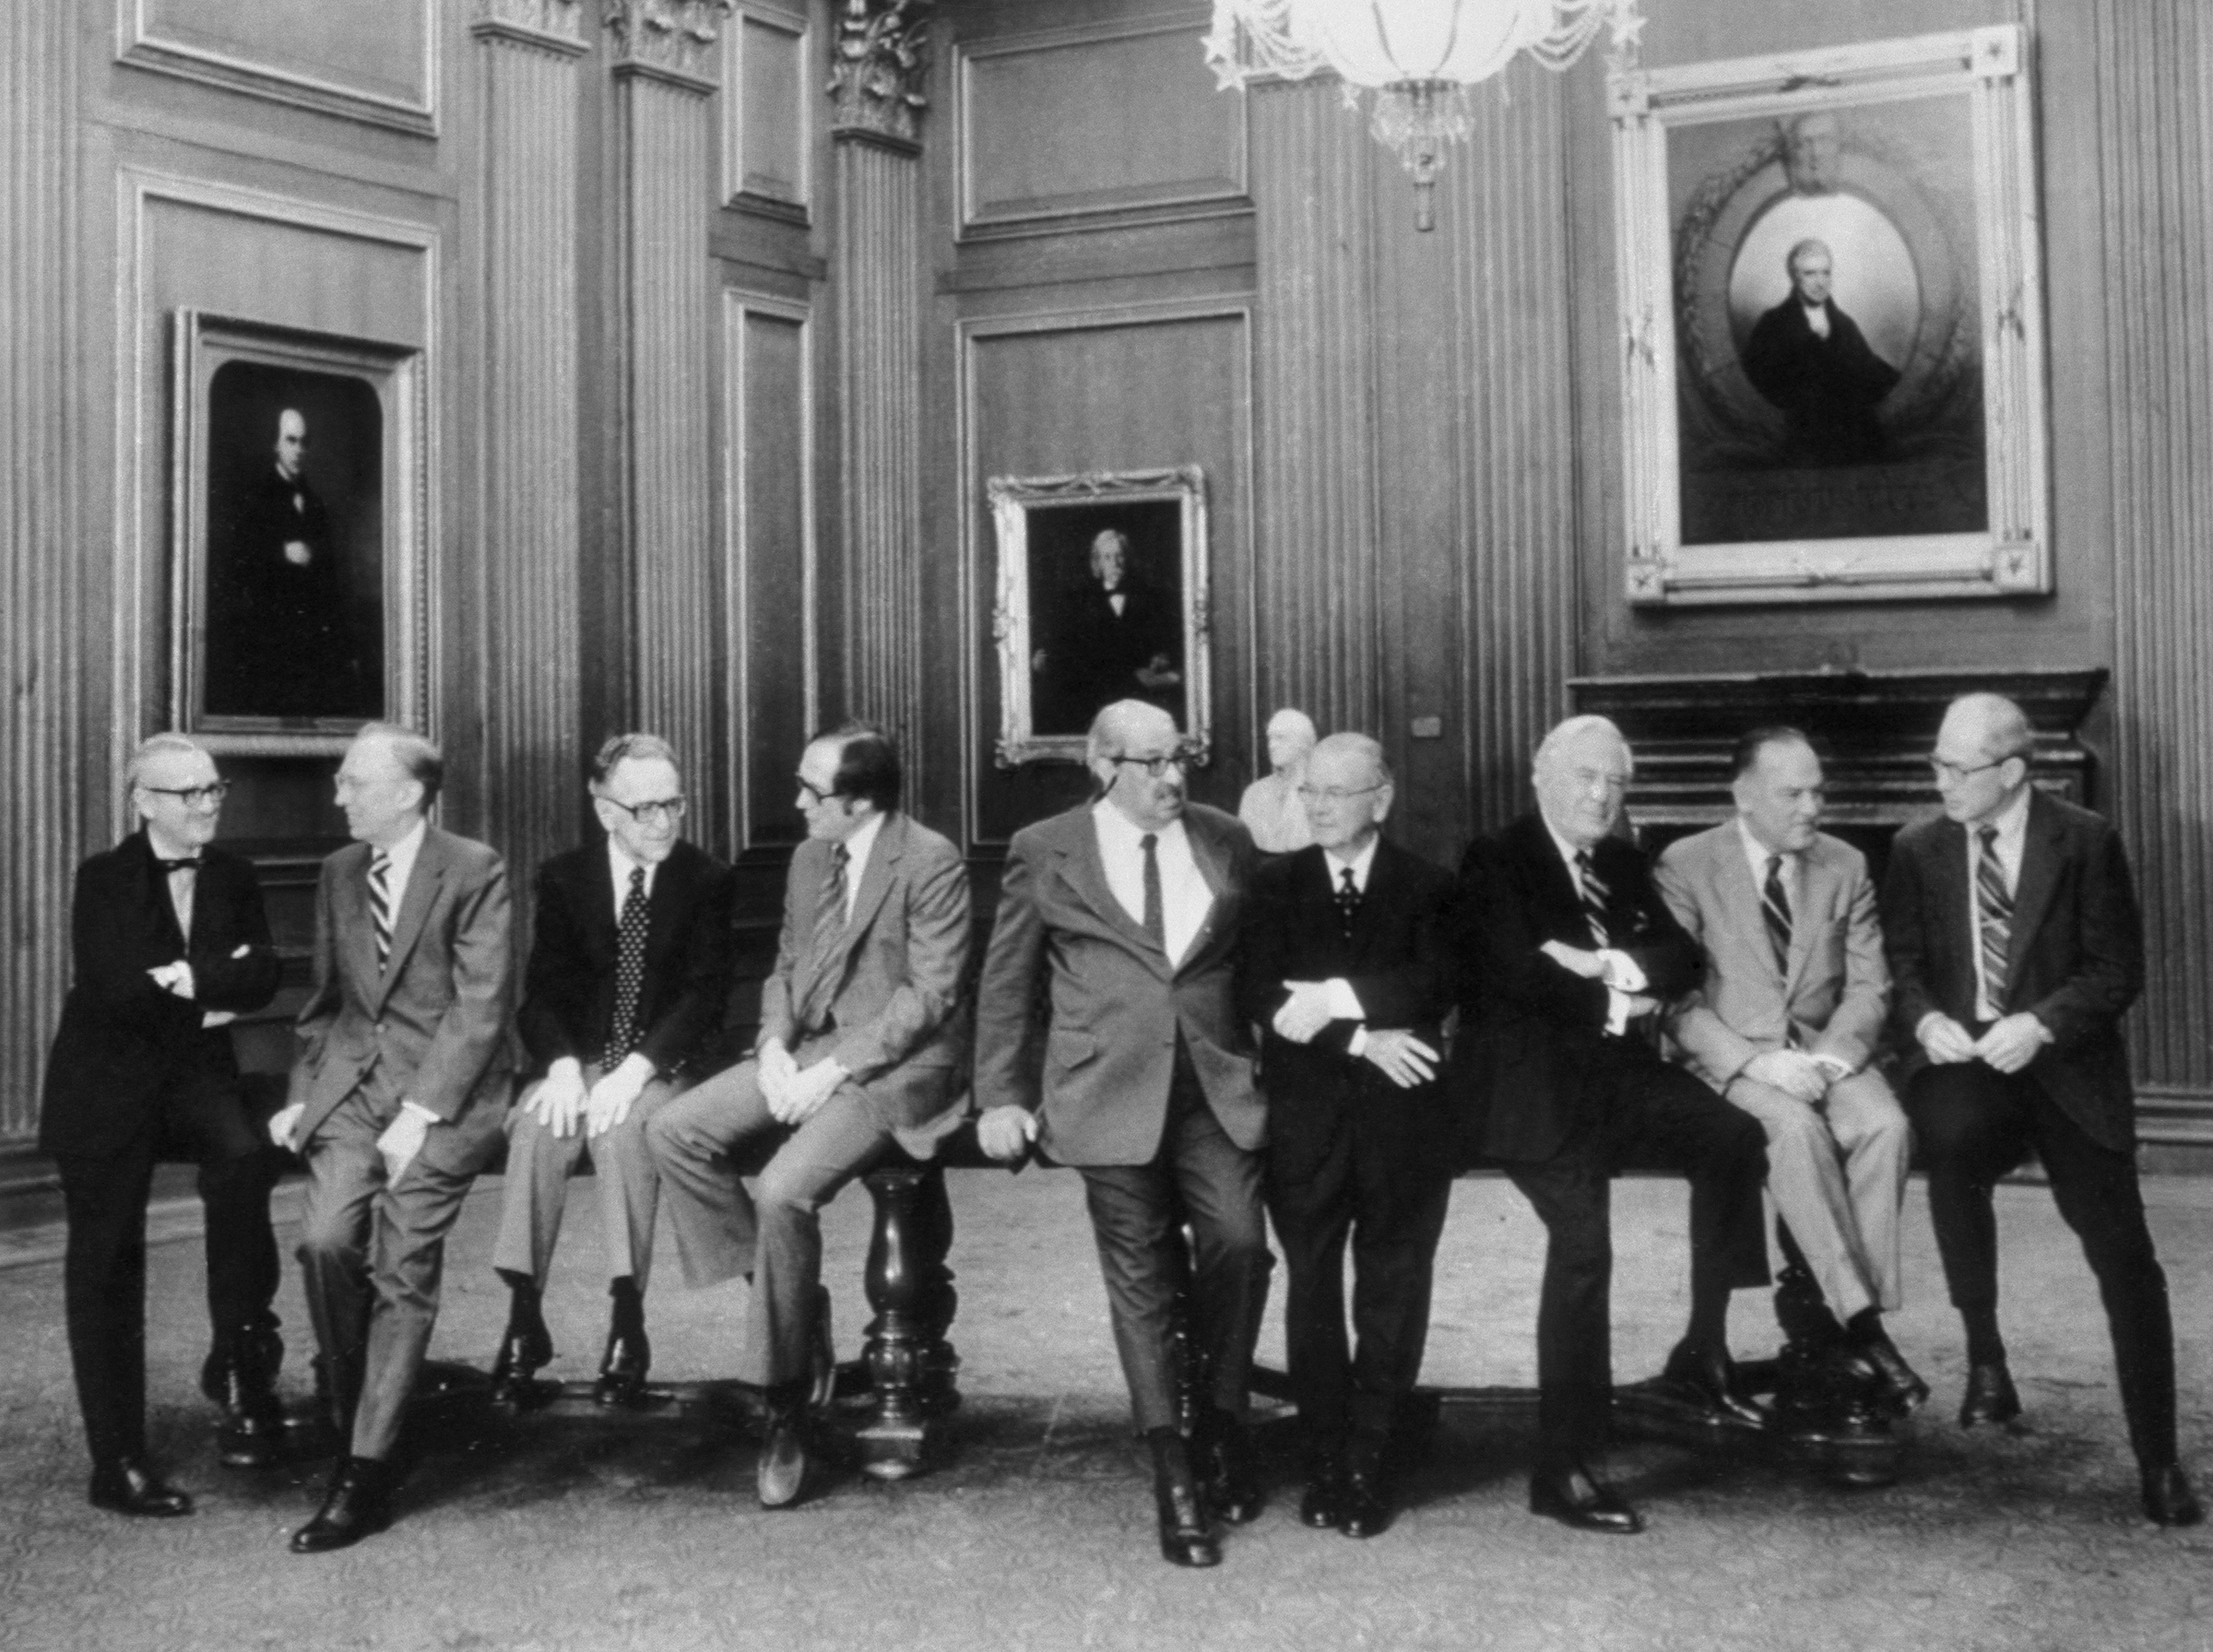 In 1977, the U.S. Supreme Court posed for what was believed to be the first casual portrait of the entire court. At left: Associate Justice John Paul Stevens. (Bettmann Archive/Getty Images)